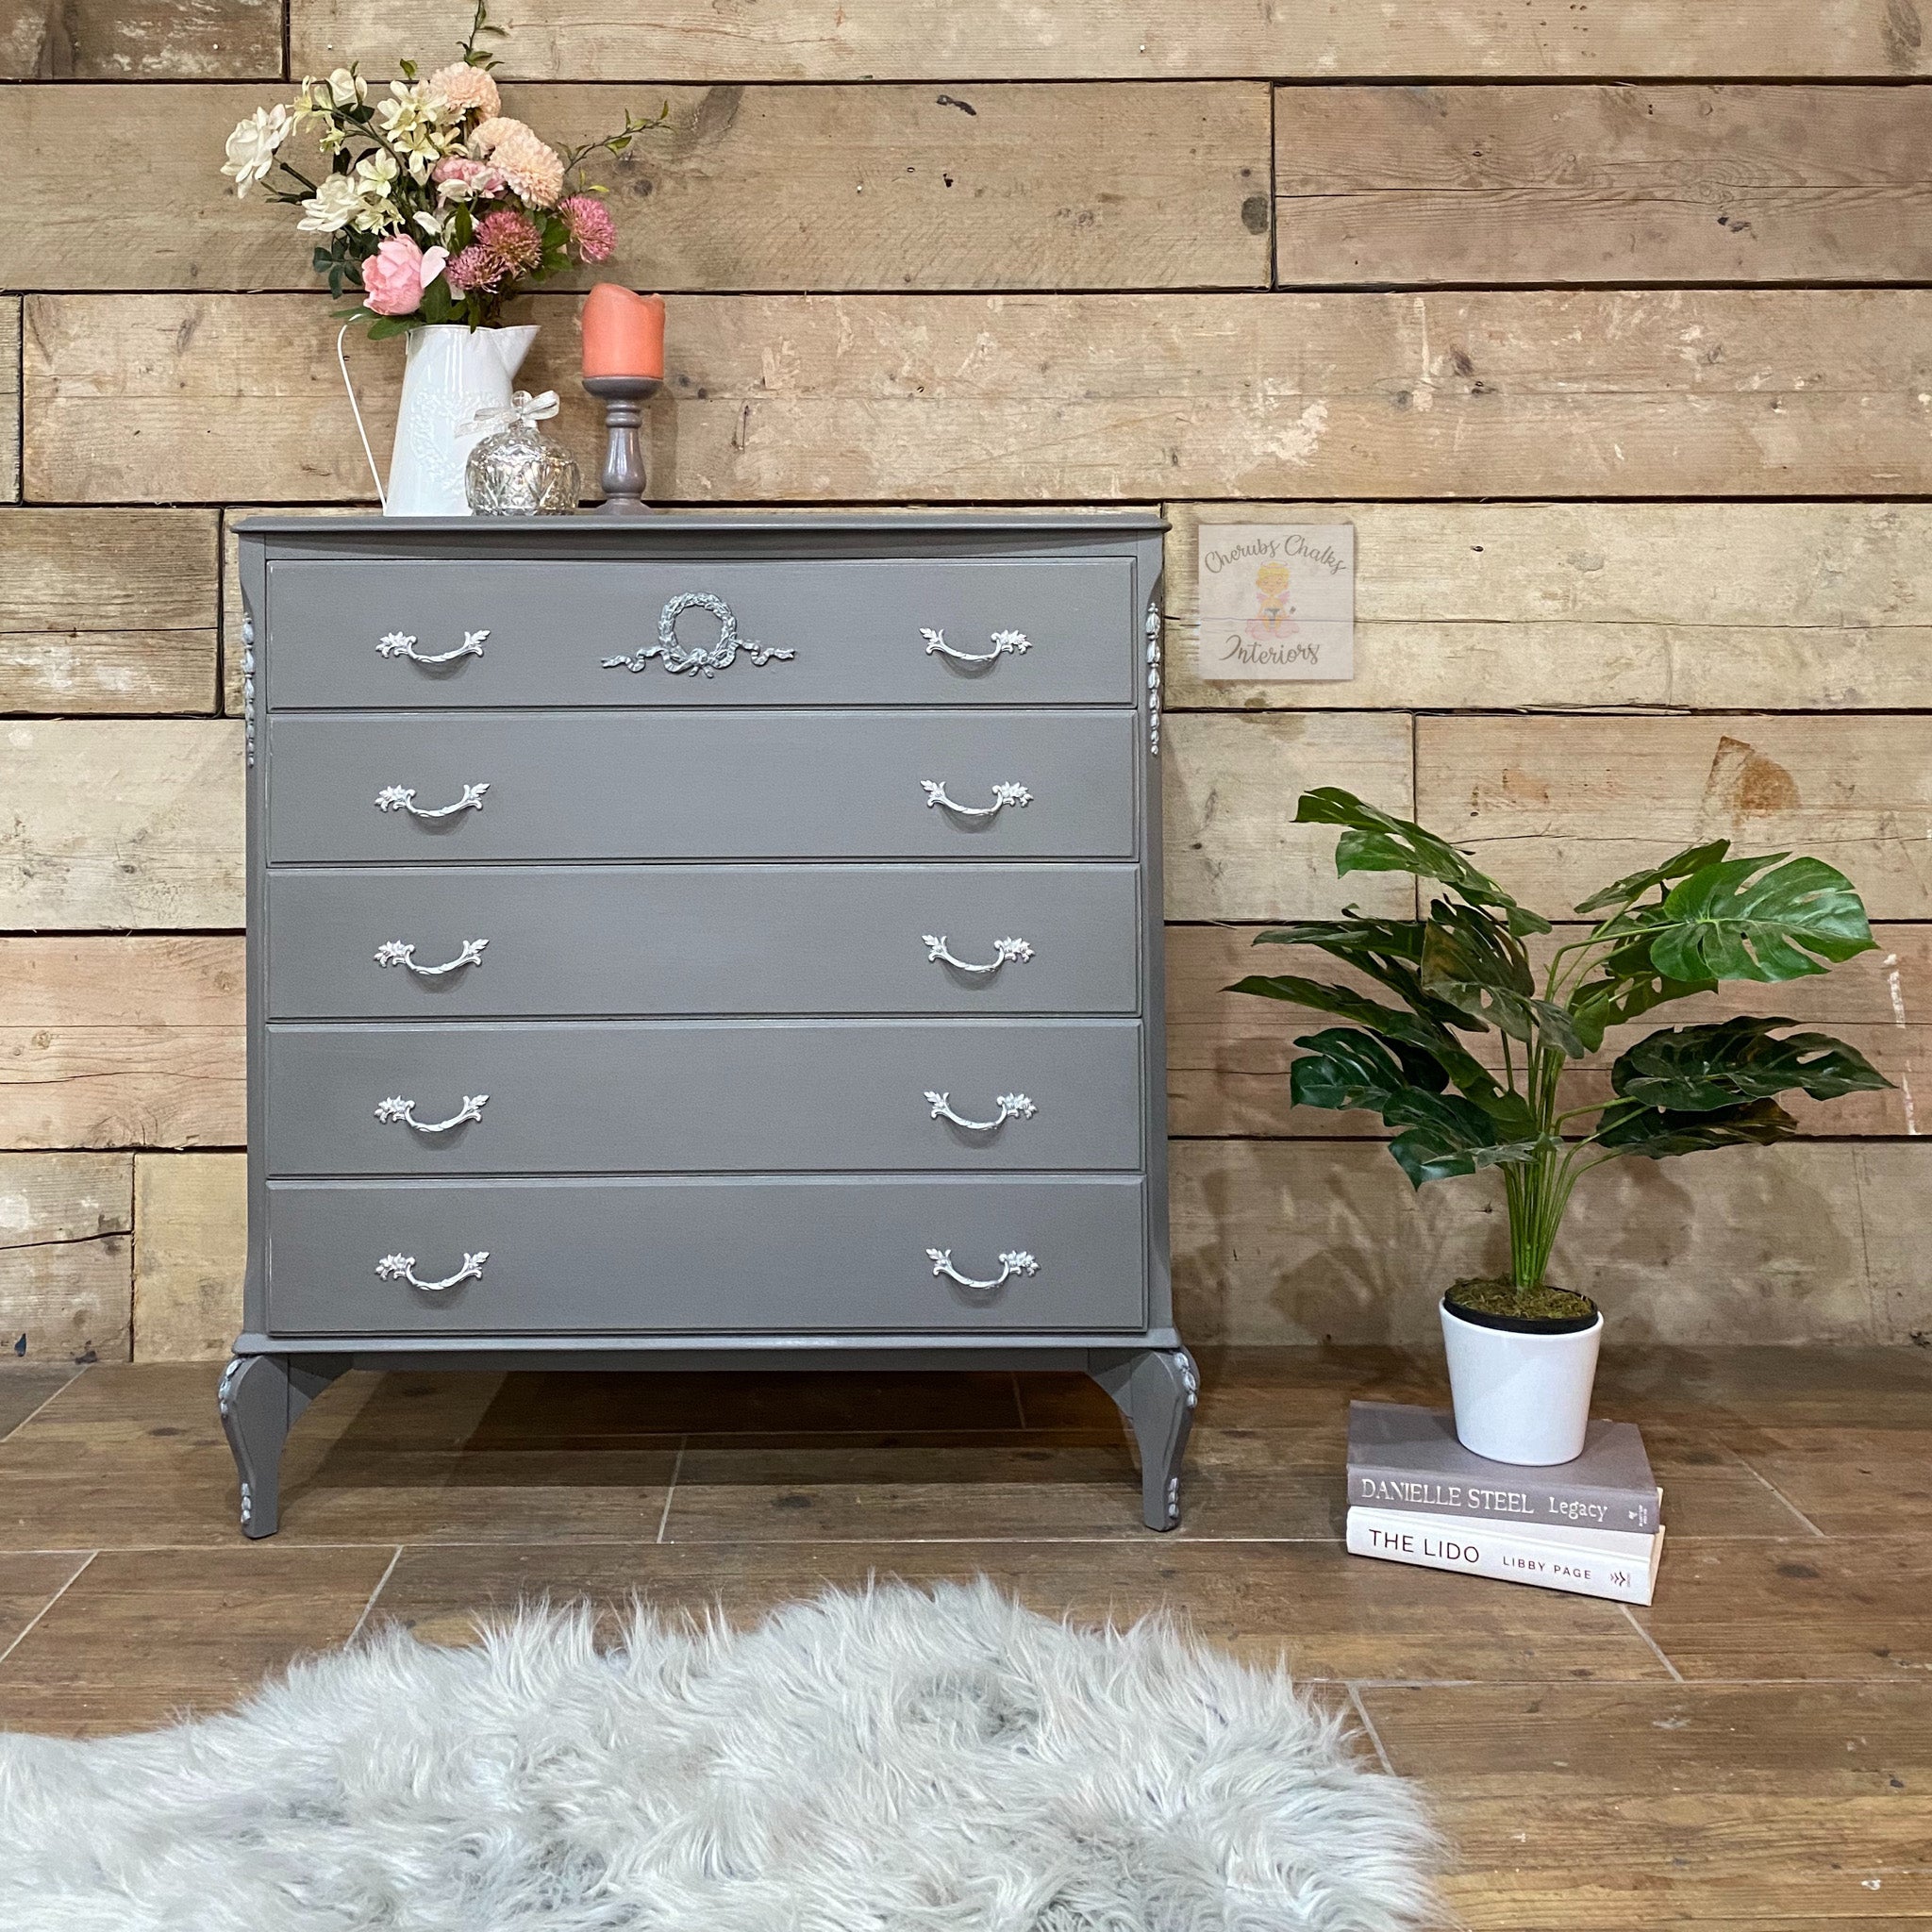 A vintage 5-drawer chest dresser refurbished by Cherubs Chalks Interiors is painted in Dixie Belle's Hurricane Gray chalk mineral paint.